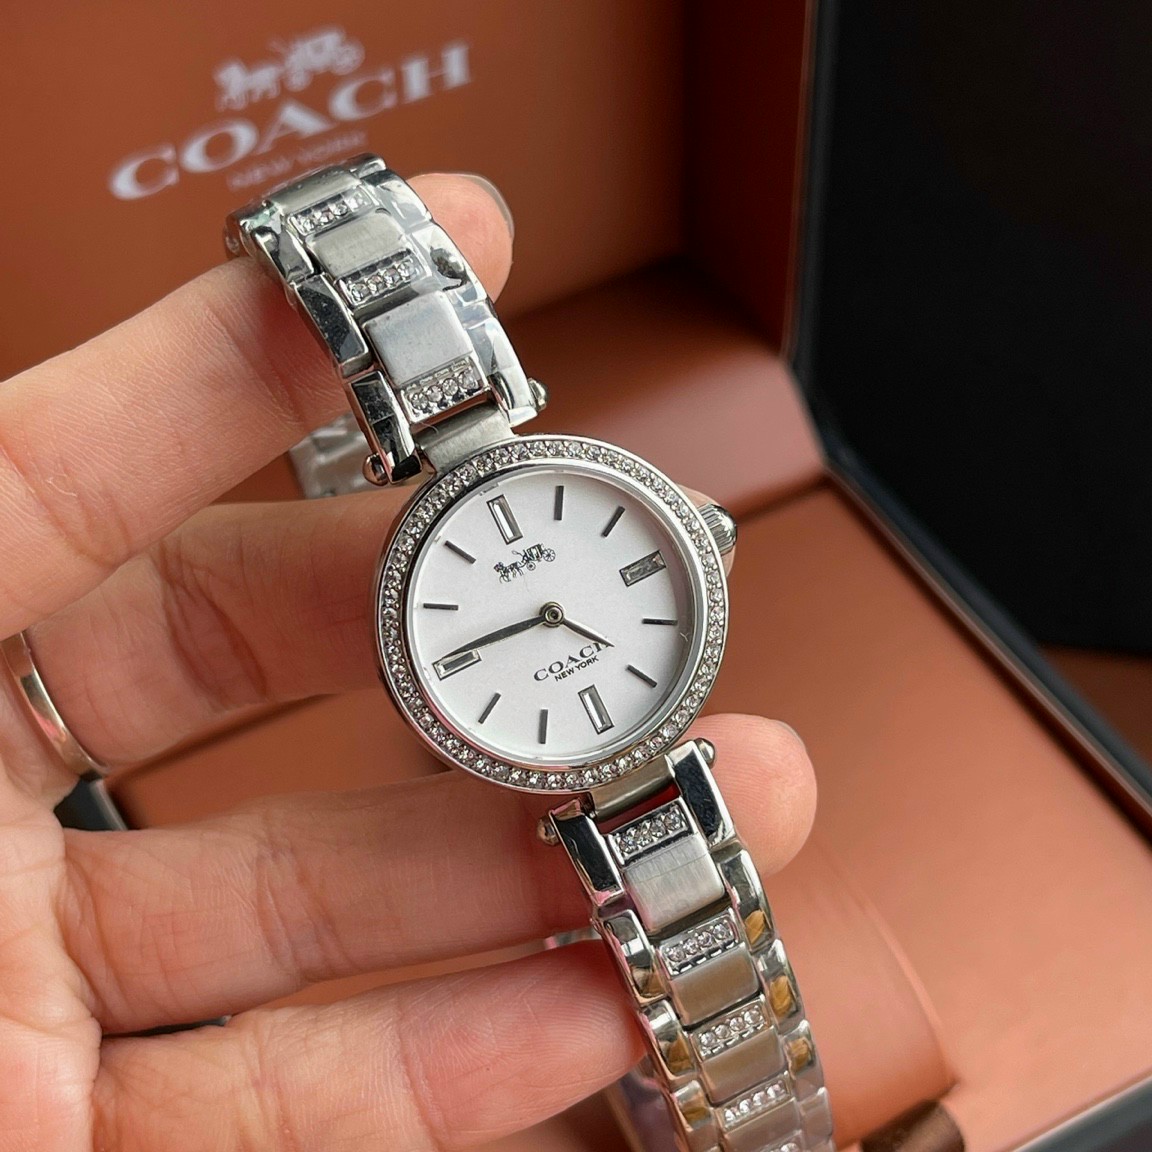  ĐỒNG HỒ COACH DÂY KIM LOẠI PARK QUARTZ WATCH WITH ANALOG DISPLAY AND STAINLESS STEEL STRAP 14503097 15